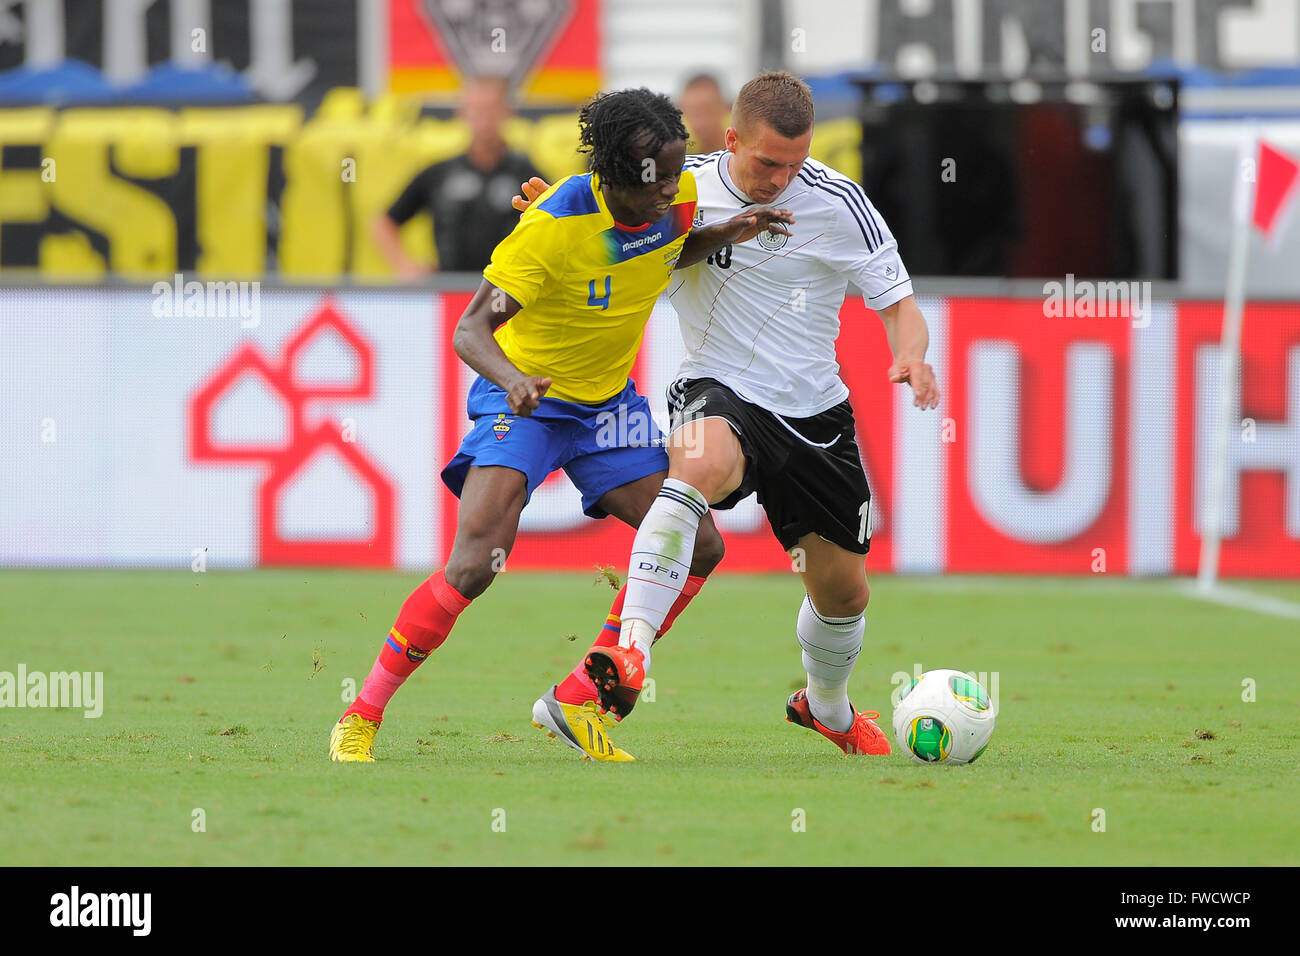 Boca Raton, FL, USA. 29th May, 2013. Germany midfielder Lukas Podolski (10) and Ecuador defender Juan Carlos Paredes (4) fight for the ball during an international friendly at FAU Stadium in Boca Raton, Florida on May 29, 2013. Germany won 4-2.ZUMA PRESS/Scott A. Miller © Scott A. Miller/ZUMA Wire/Alamy Live News Stock Photo